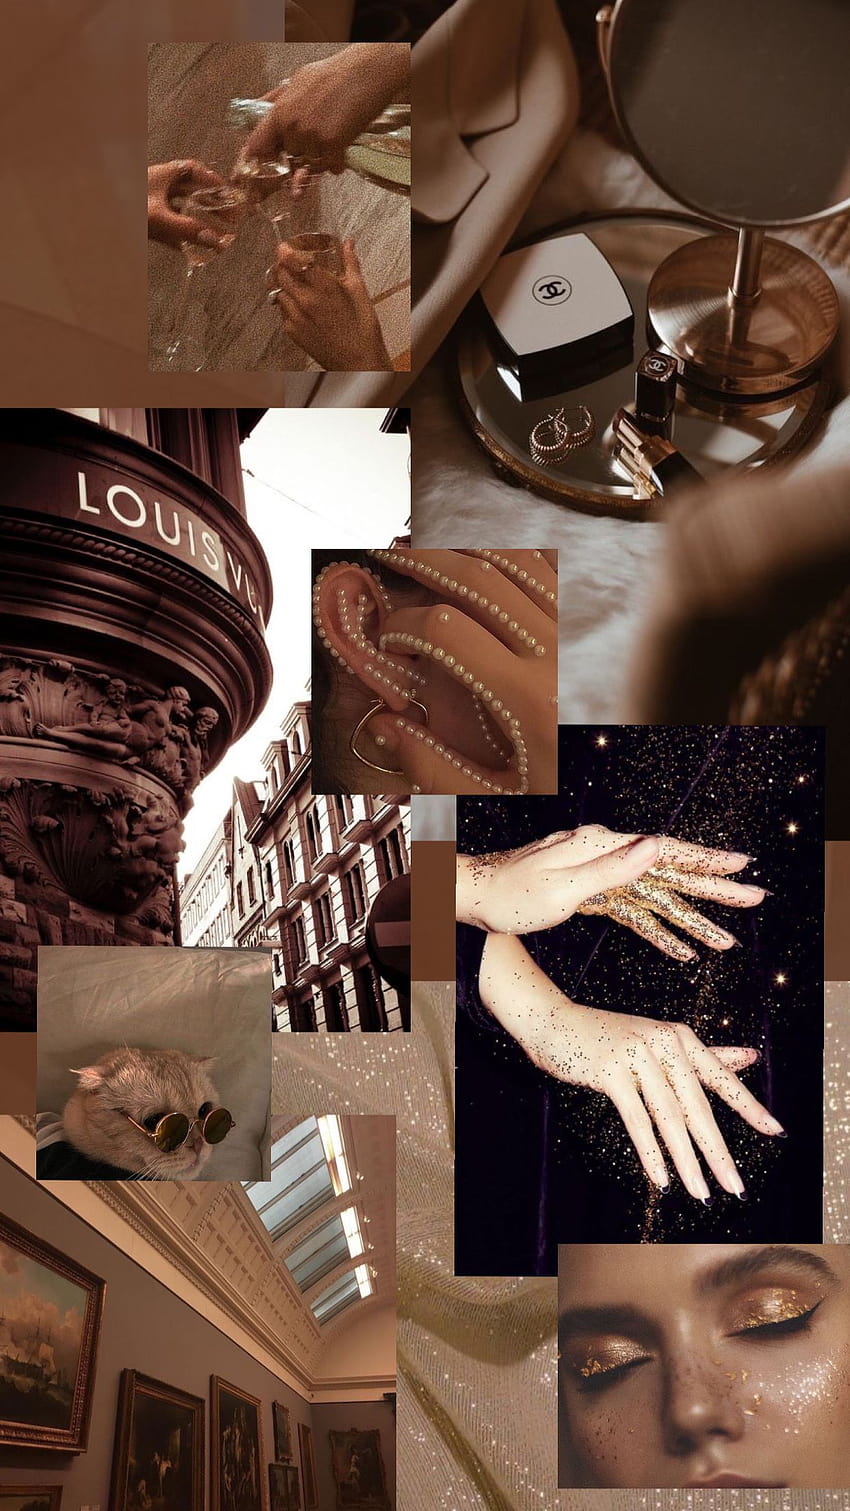 A collage of images including a Louis Vuitton store, a handbag, a pair of shoes, a makeup palette, a handbag, a cityscape, a cat, and a close up of a woman's eyes. - Dior